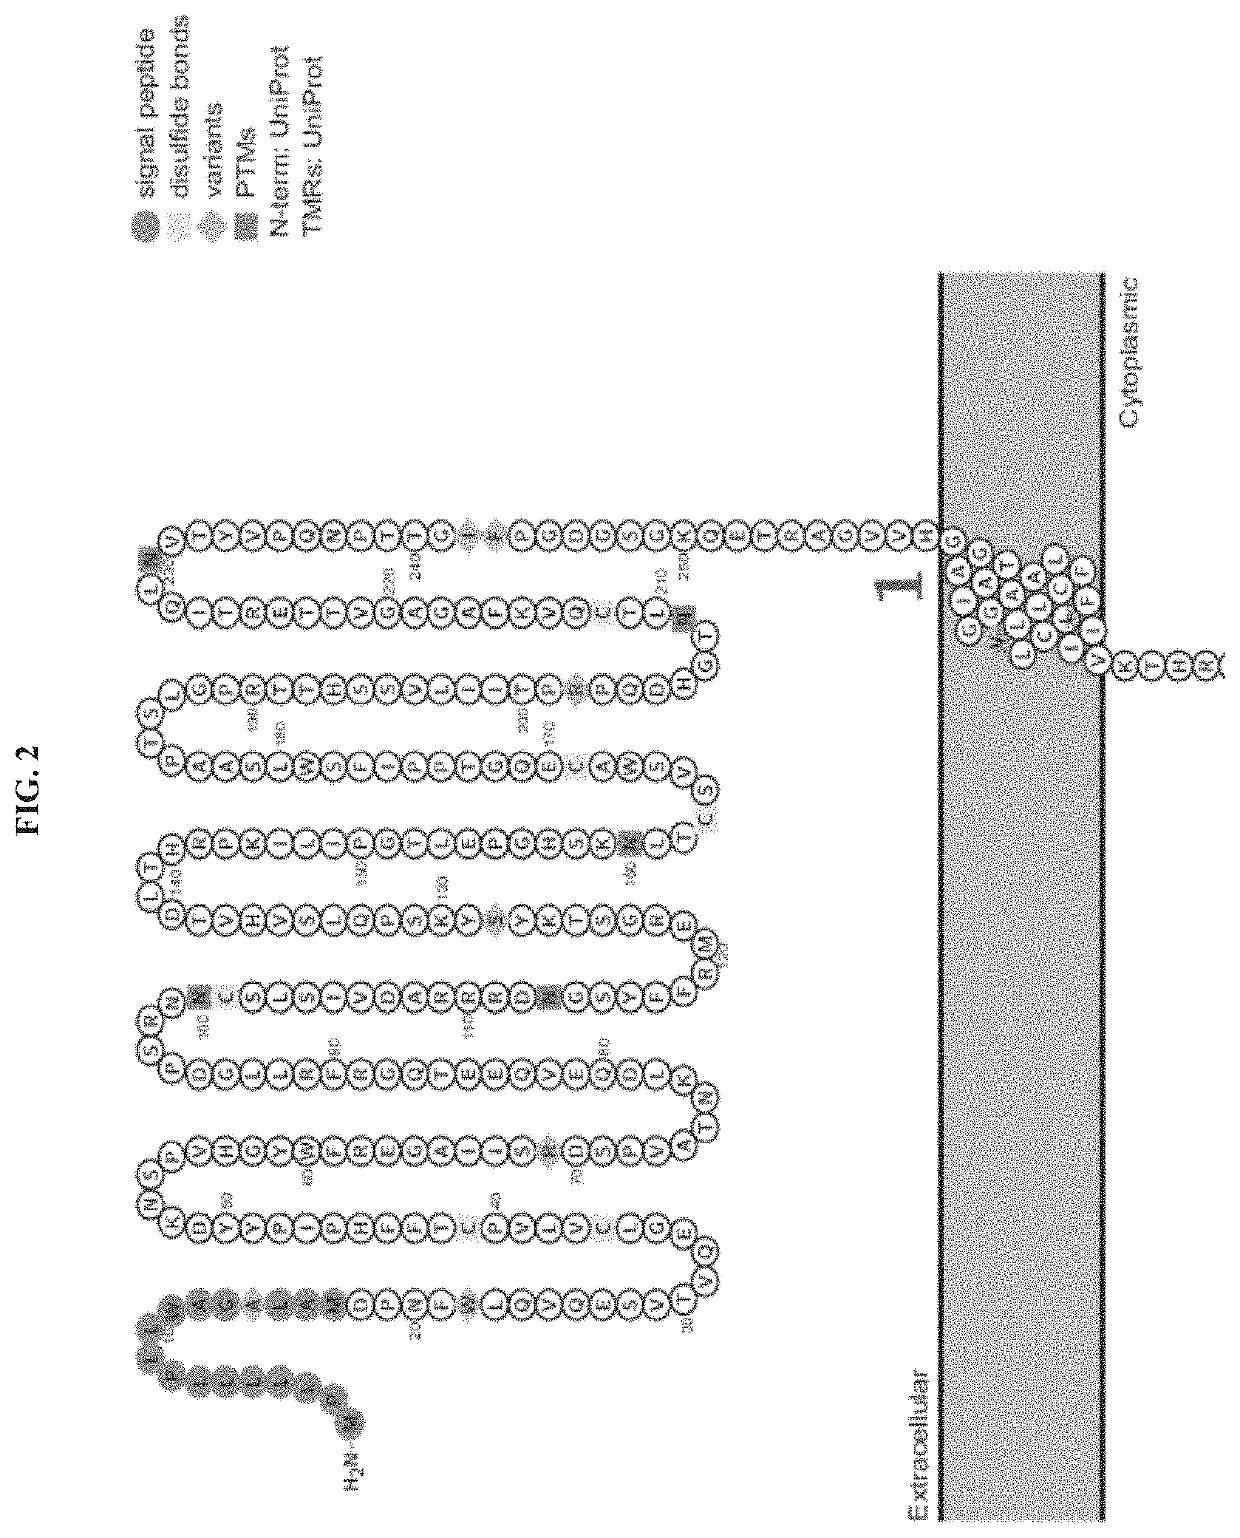 Genetically engineered hematopoietic stem cells and uses thereof